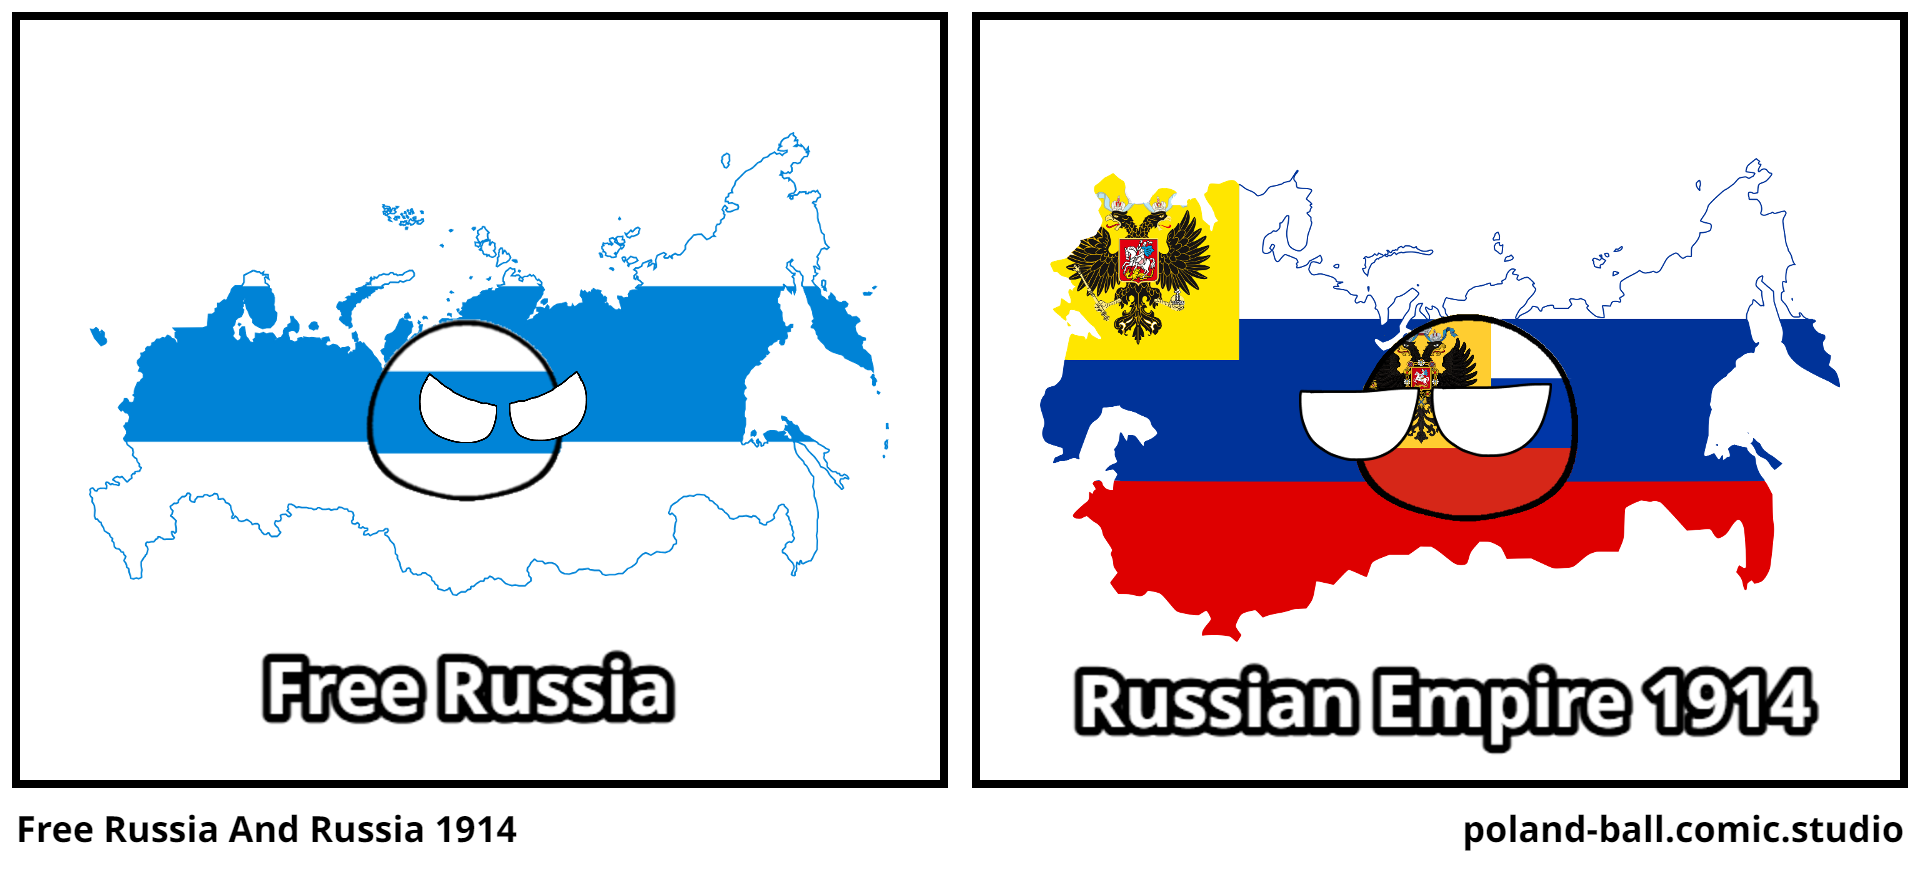 Free Russia And Russia 1914